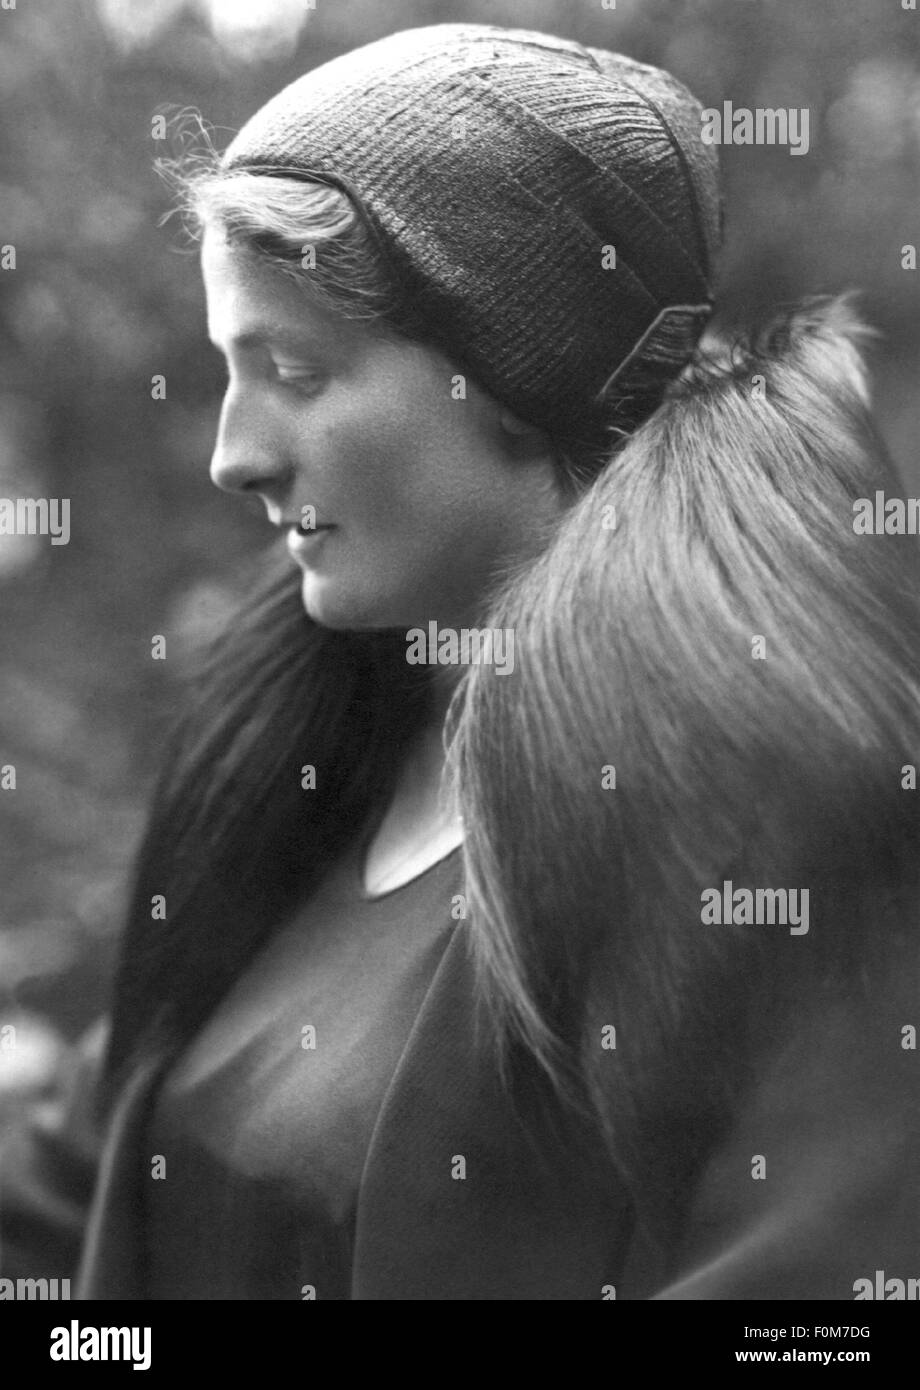 Wagner, Winifred, 23.6.1897 - 5.3.1980, daughter-in-law of Richard Wagner, portrait, profile, photo by A. Pieperhoff, Bayreuth, circa 1930, Stock Photo